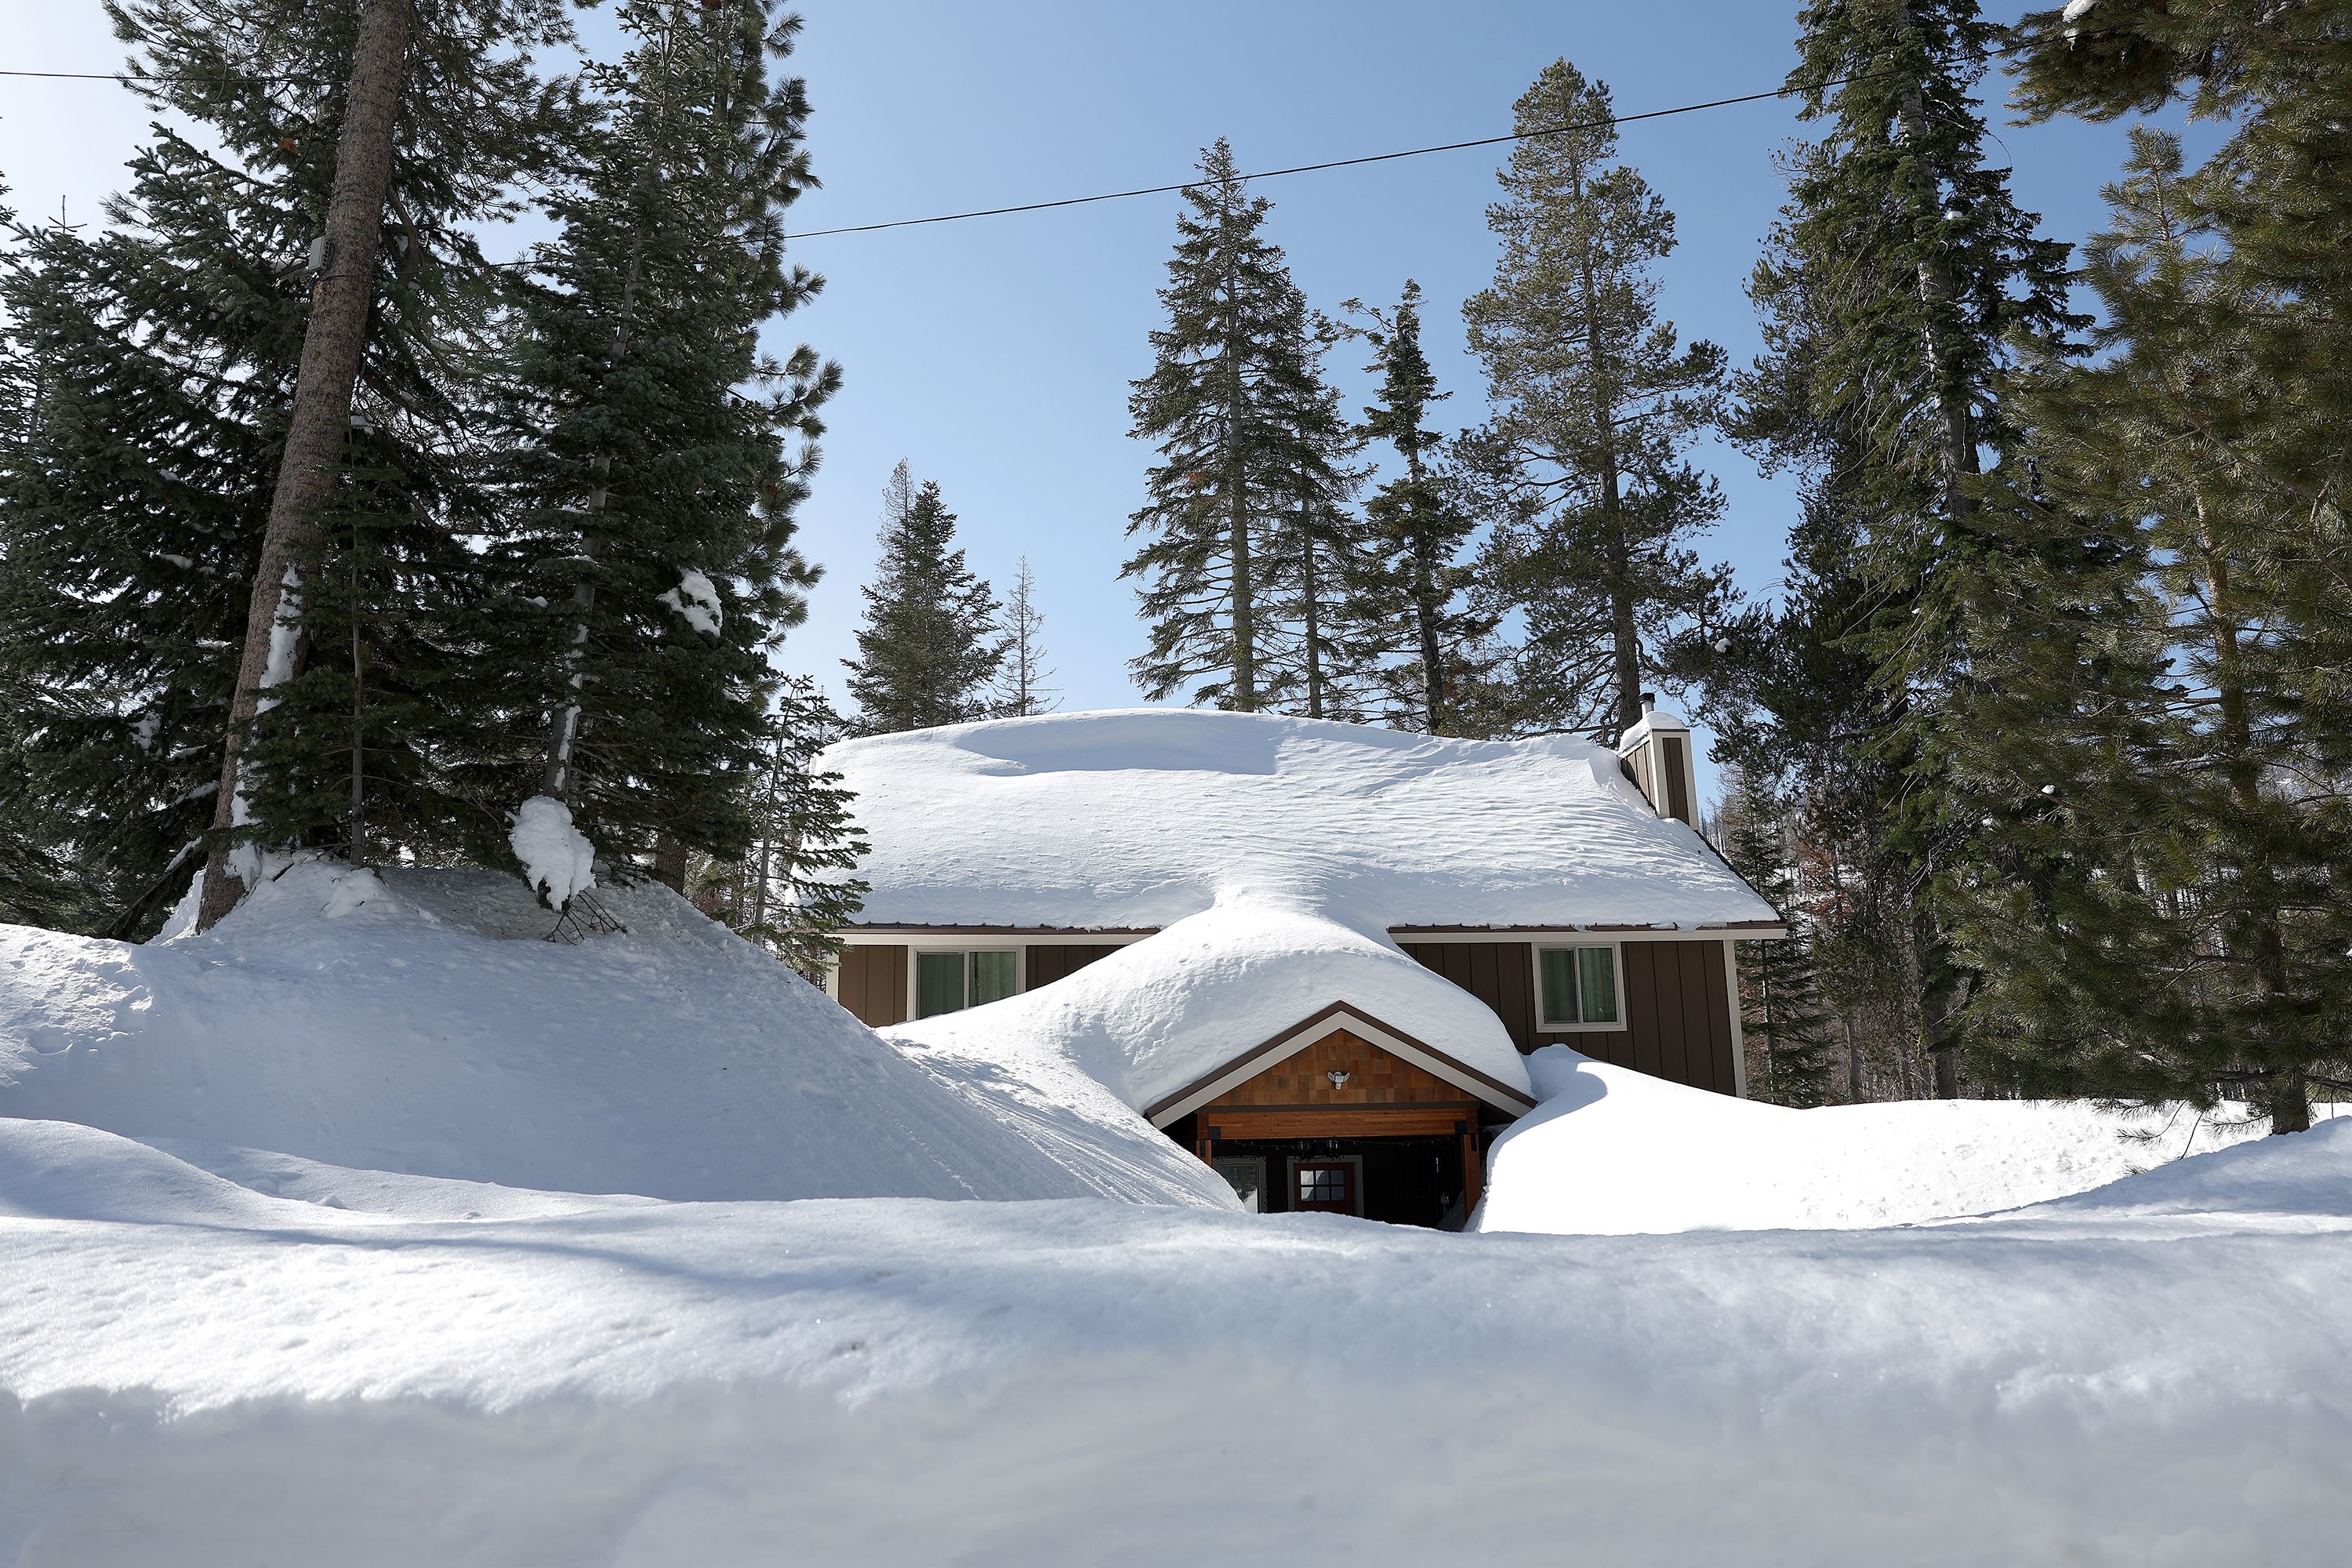 California's snowfall so far this winter rivals the state's record